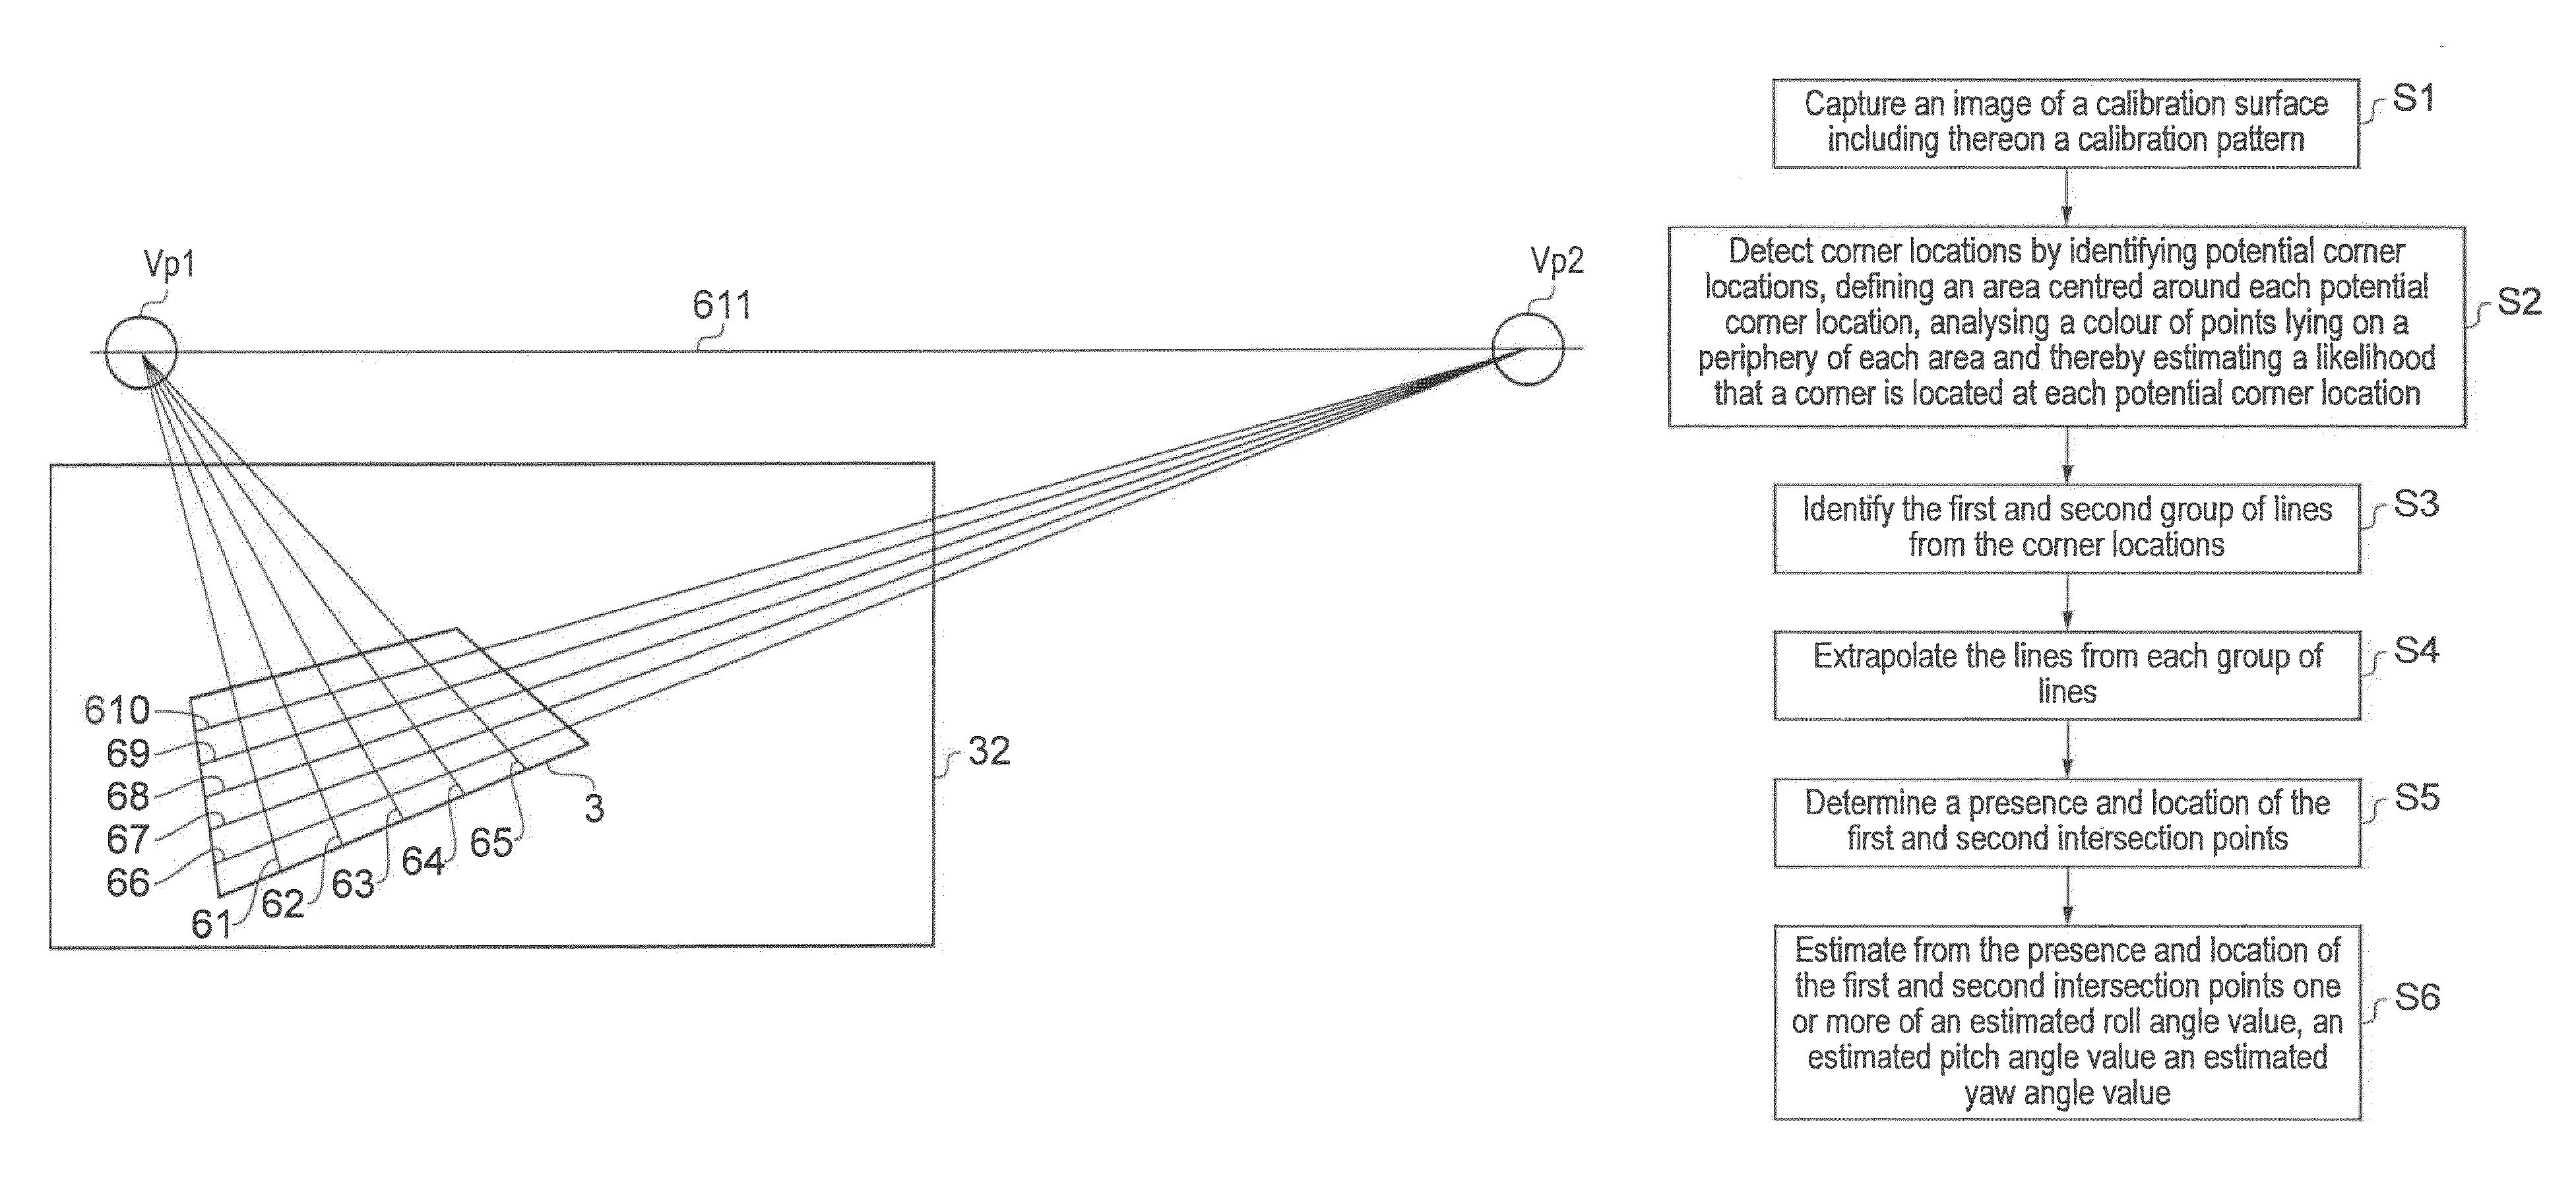 Image processing system for estimating camera parameters